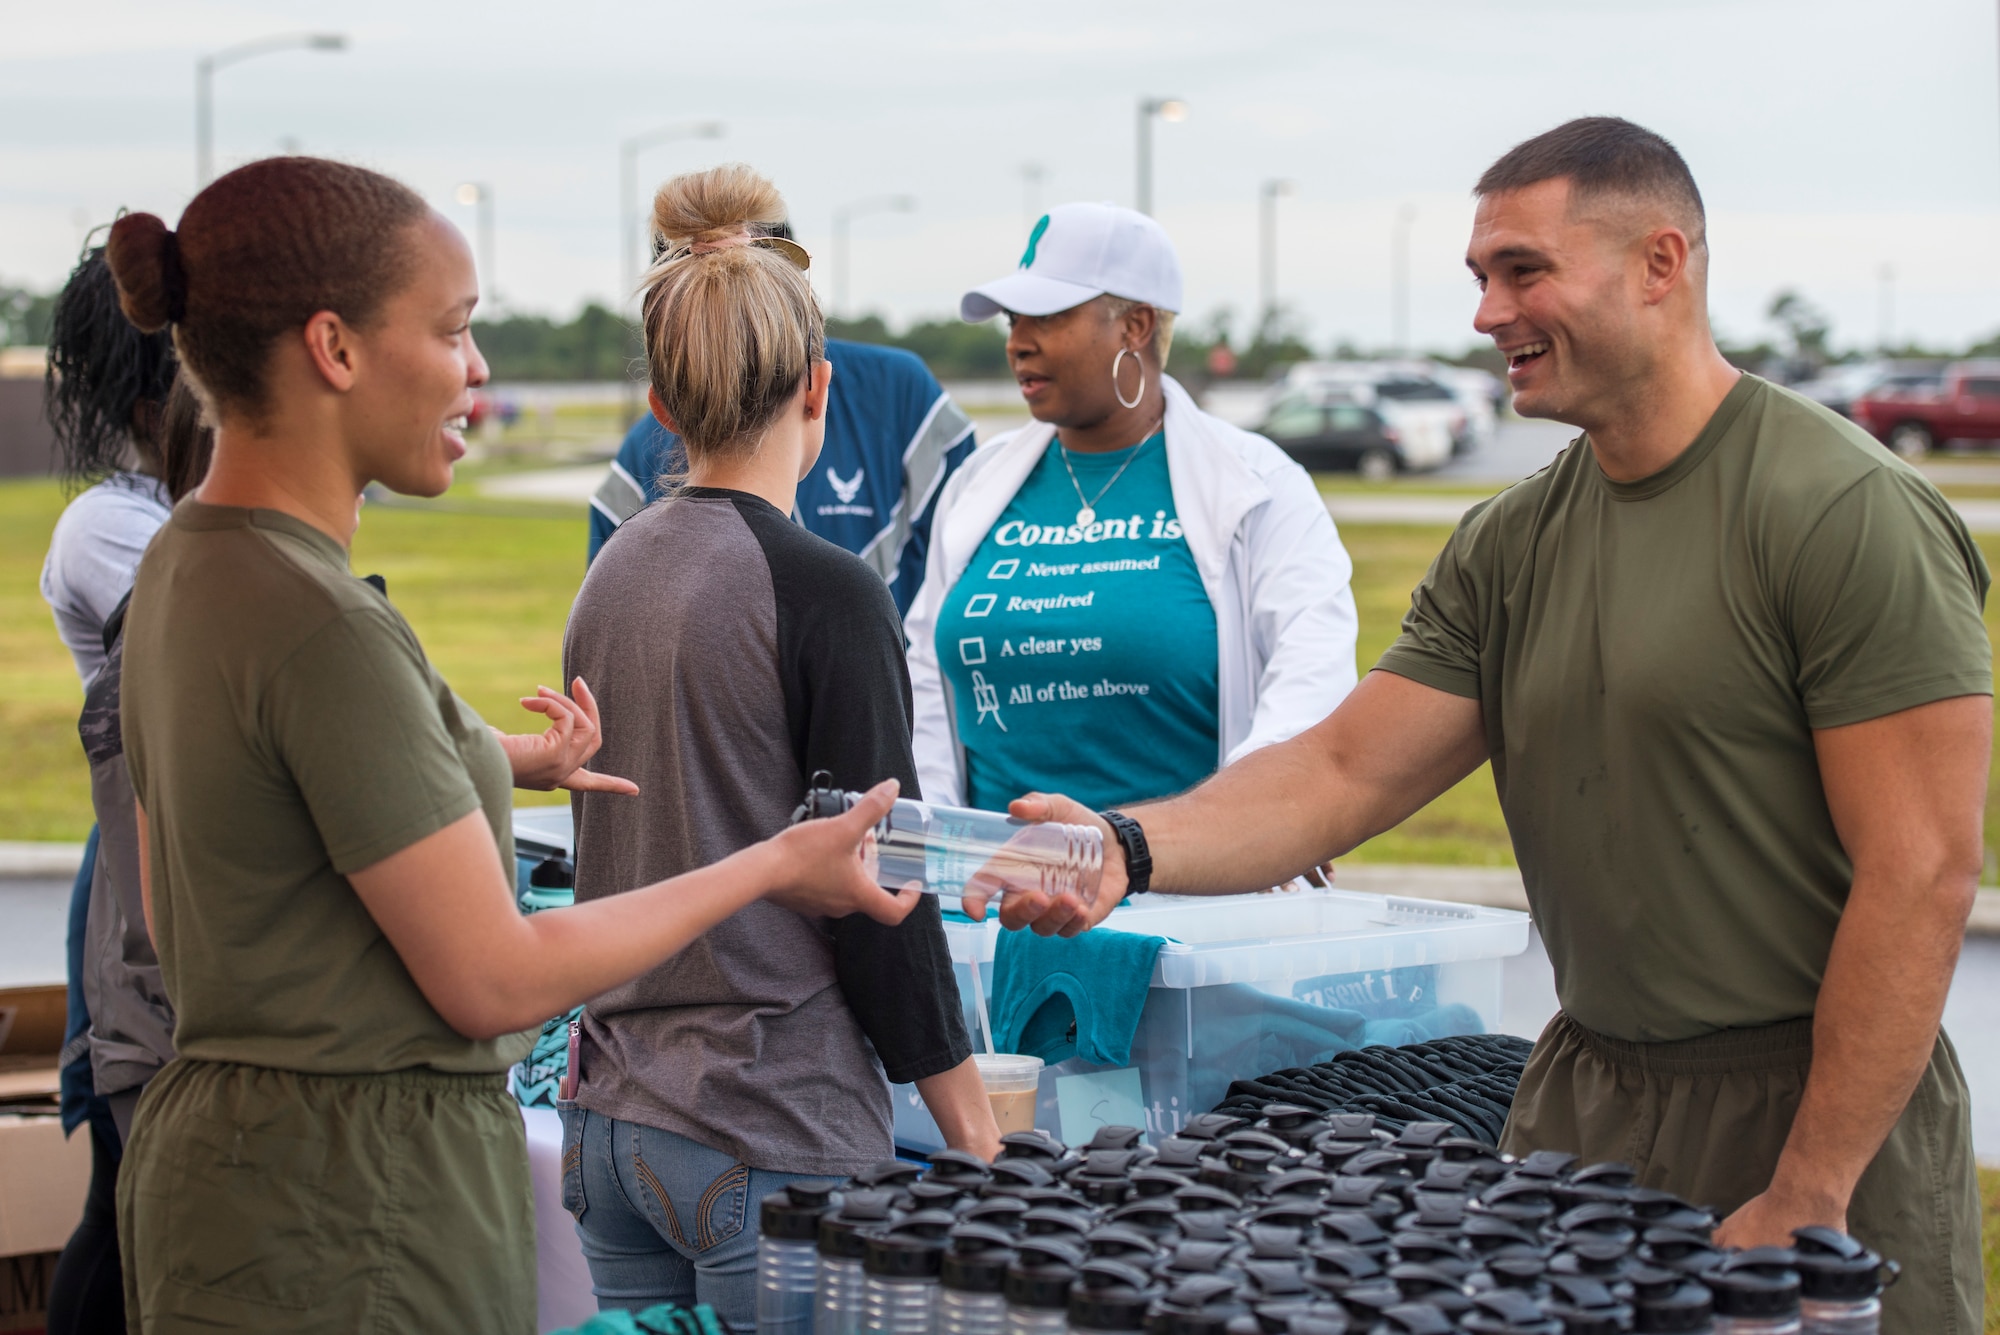 Two U.S. Marines volunteer for a Sexual Assault Prevention and Response 5K run at MacDill Air Force Base, Fla., April 5, 2019.